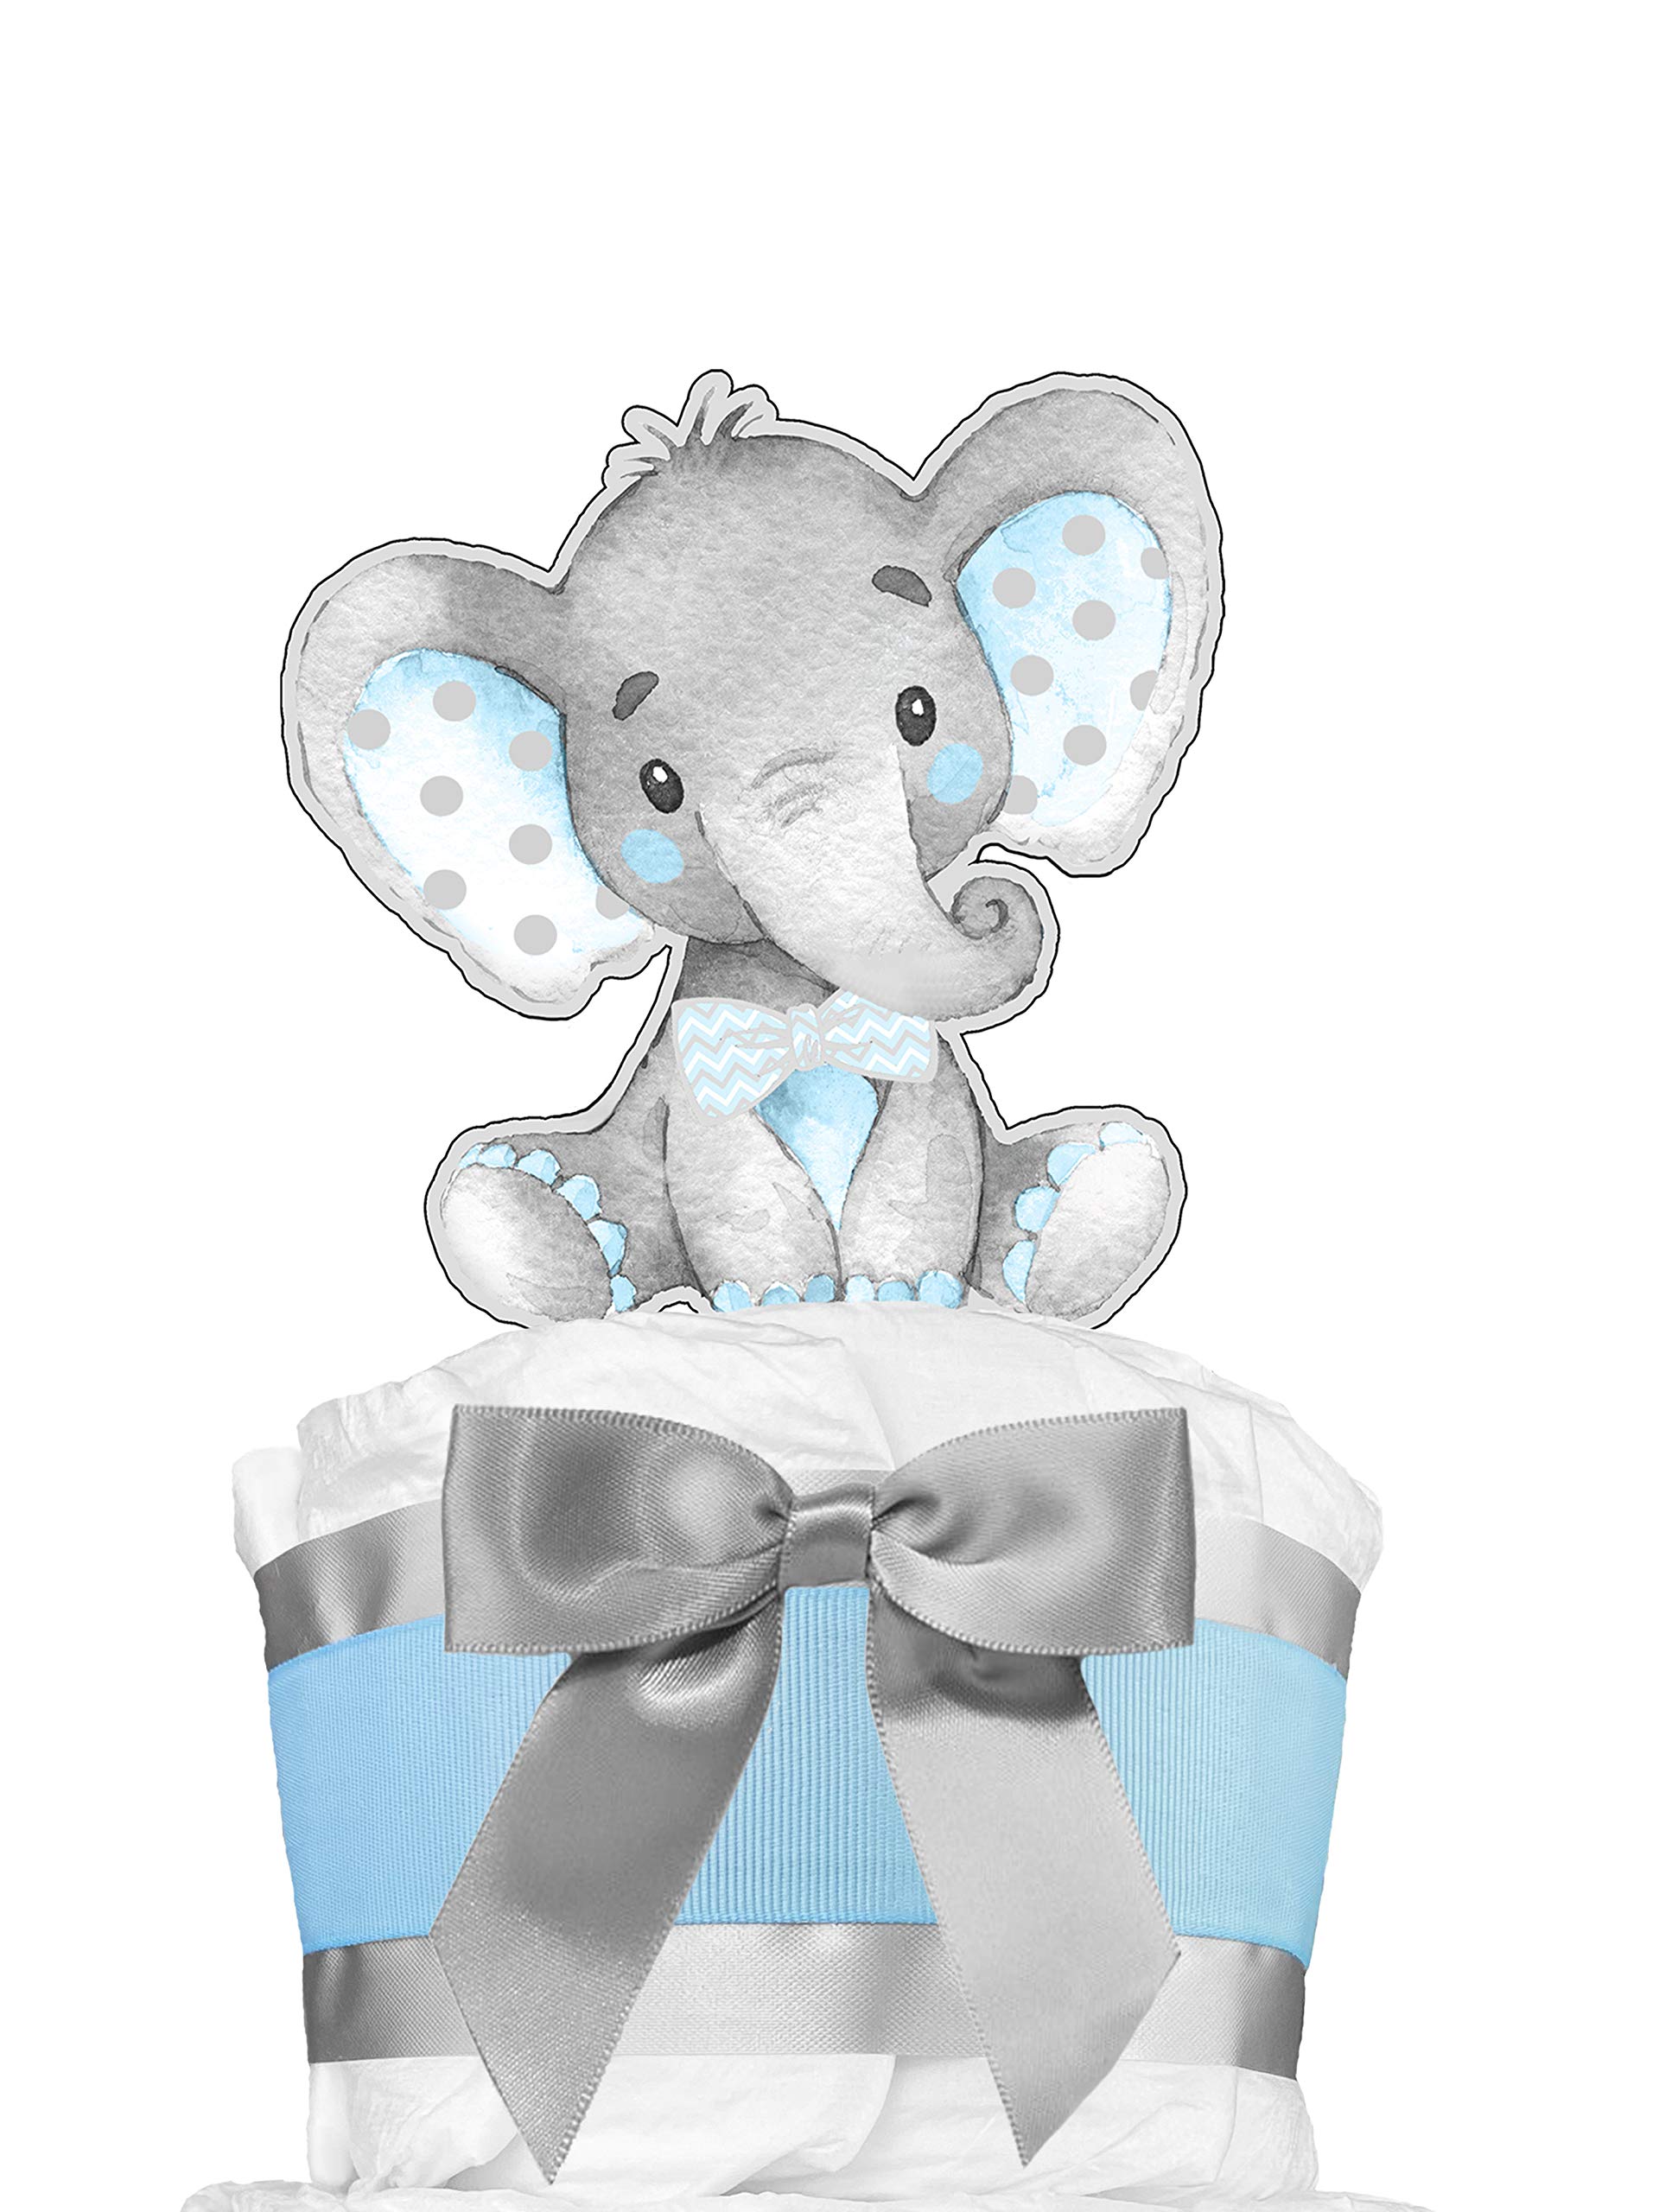 Pampers Swaddlers Elephant Diaper Cake, Blue and Gray, 42 Count, Size 1, Newborn Gift for Boy